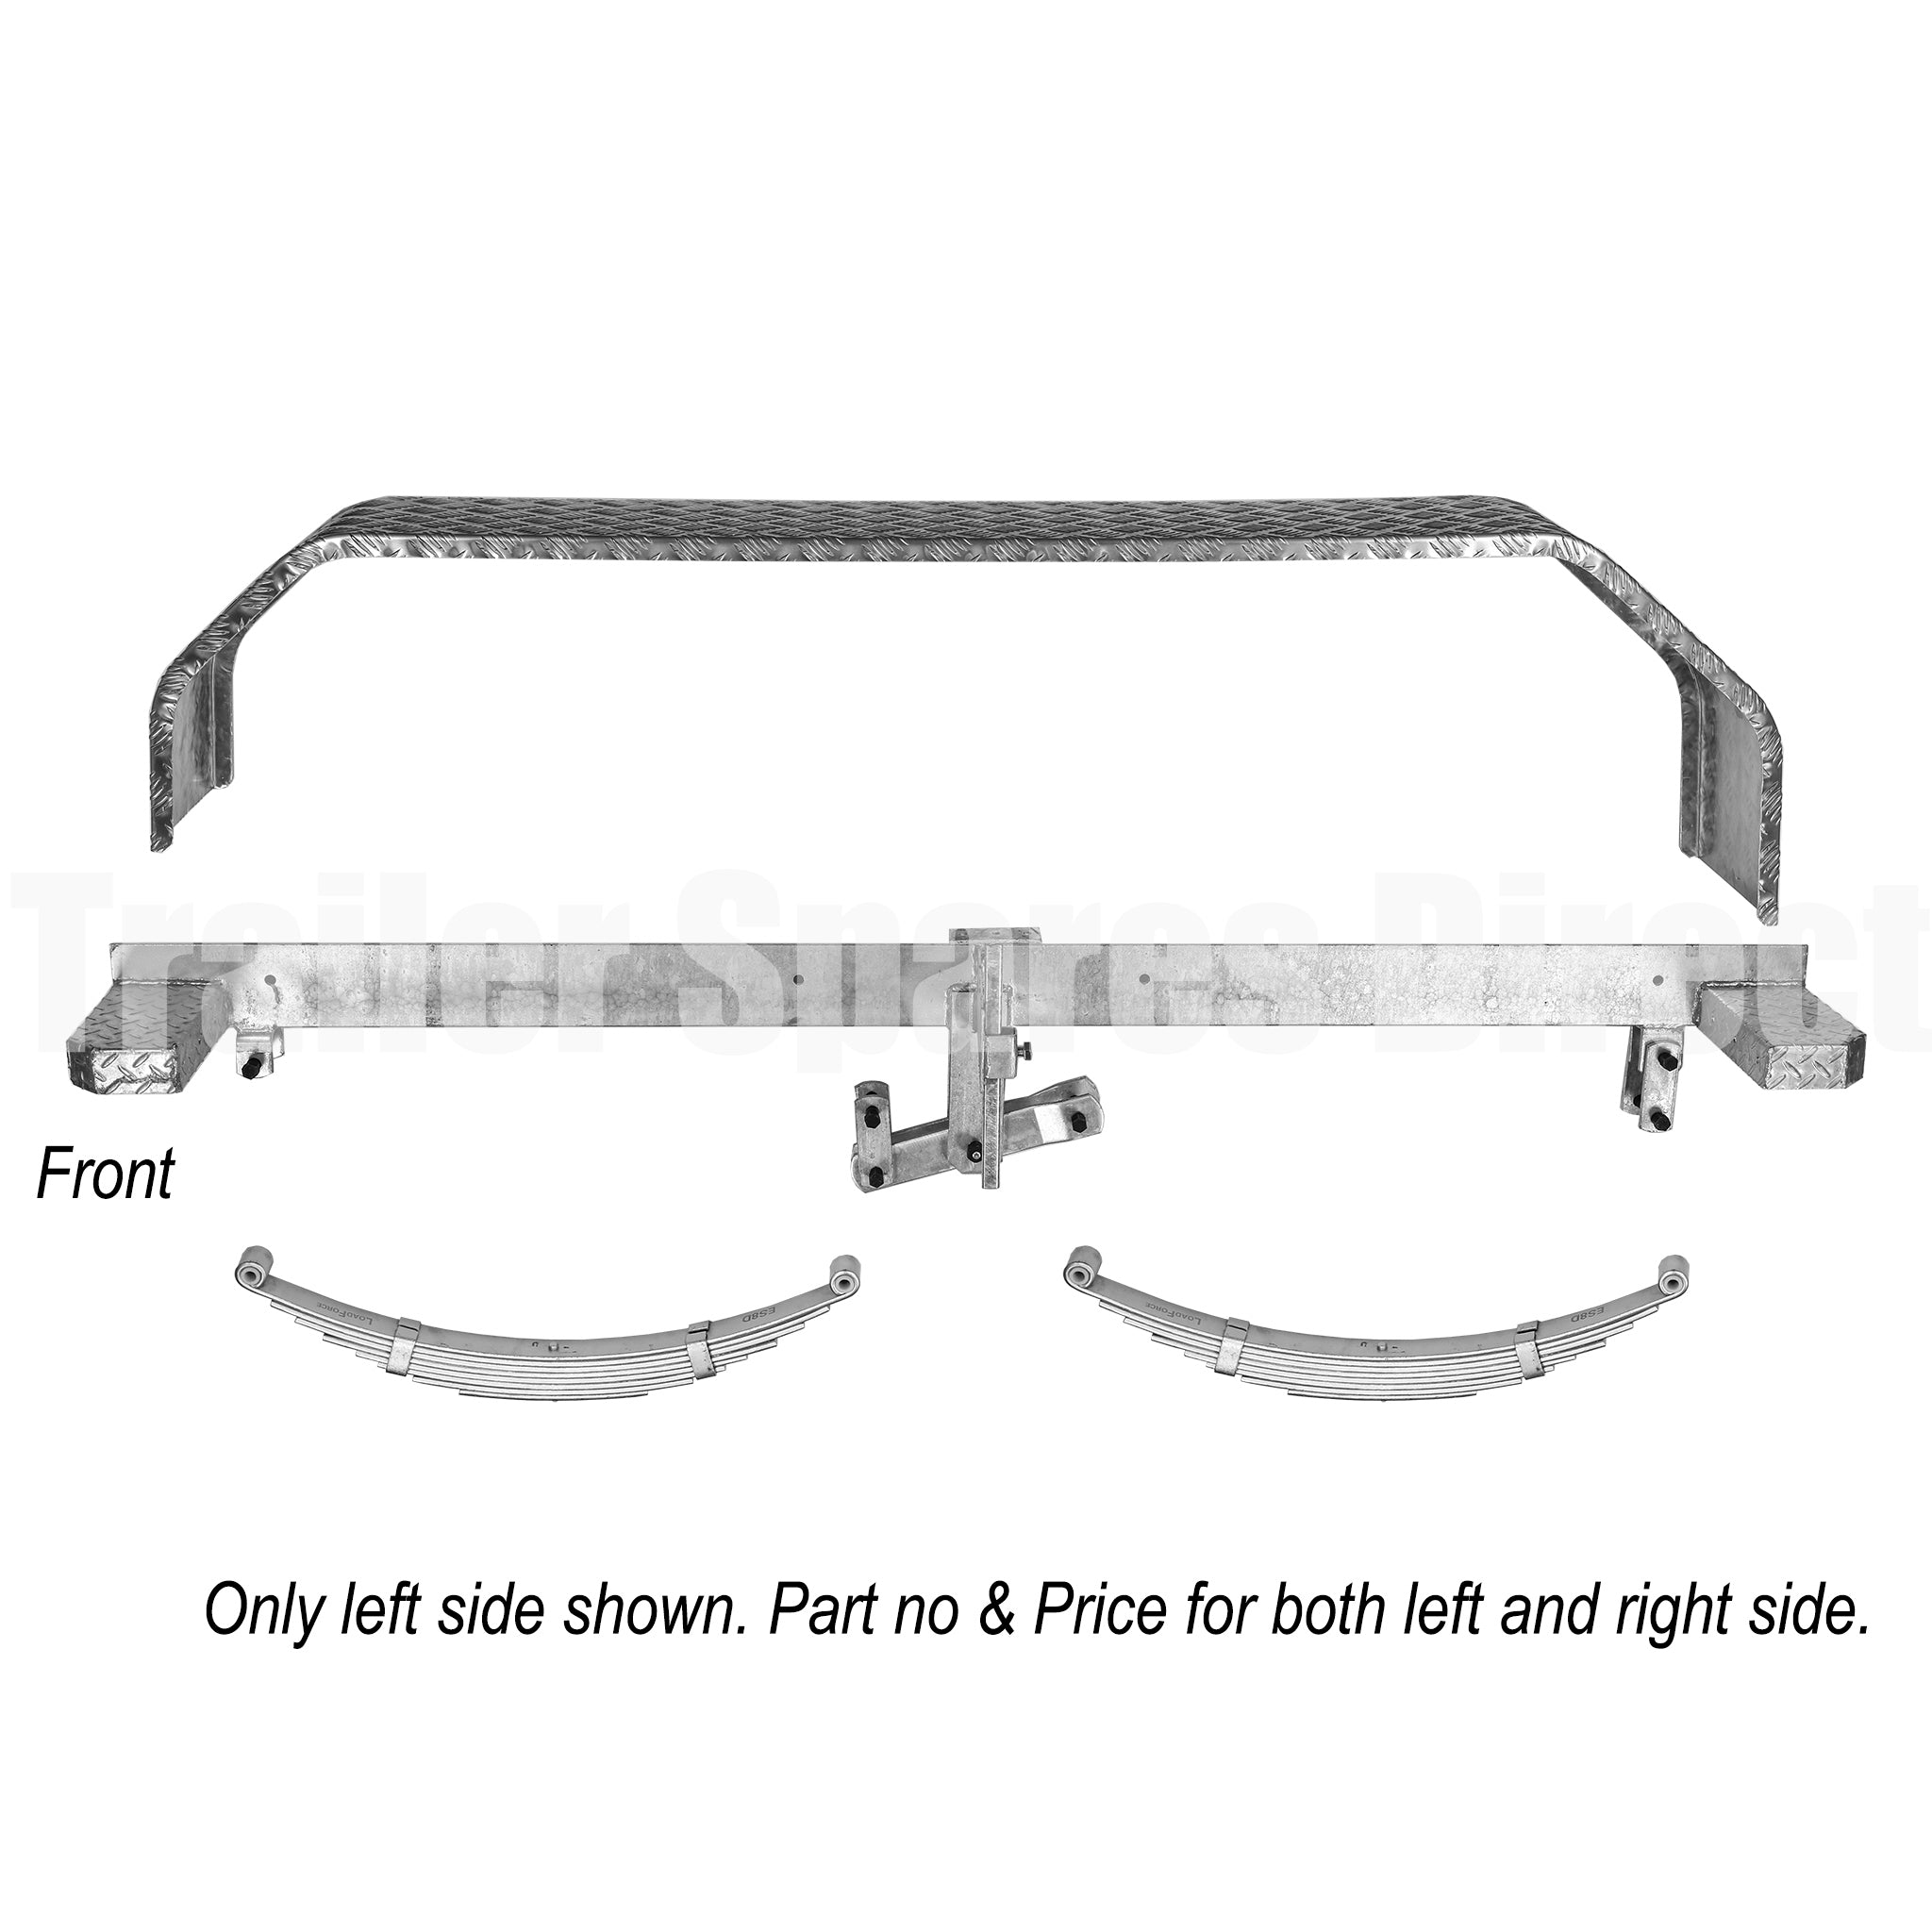 Galvanised suspension beam assembly for a 3800kg rated tandem trailer with 15 inch wheels (pair)